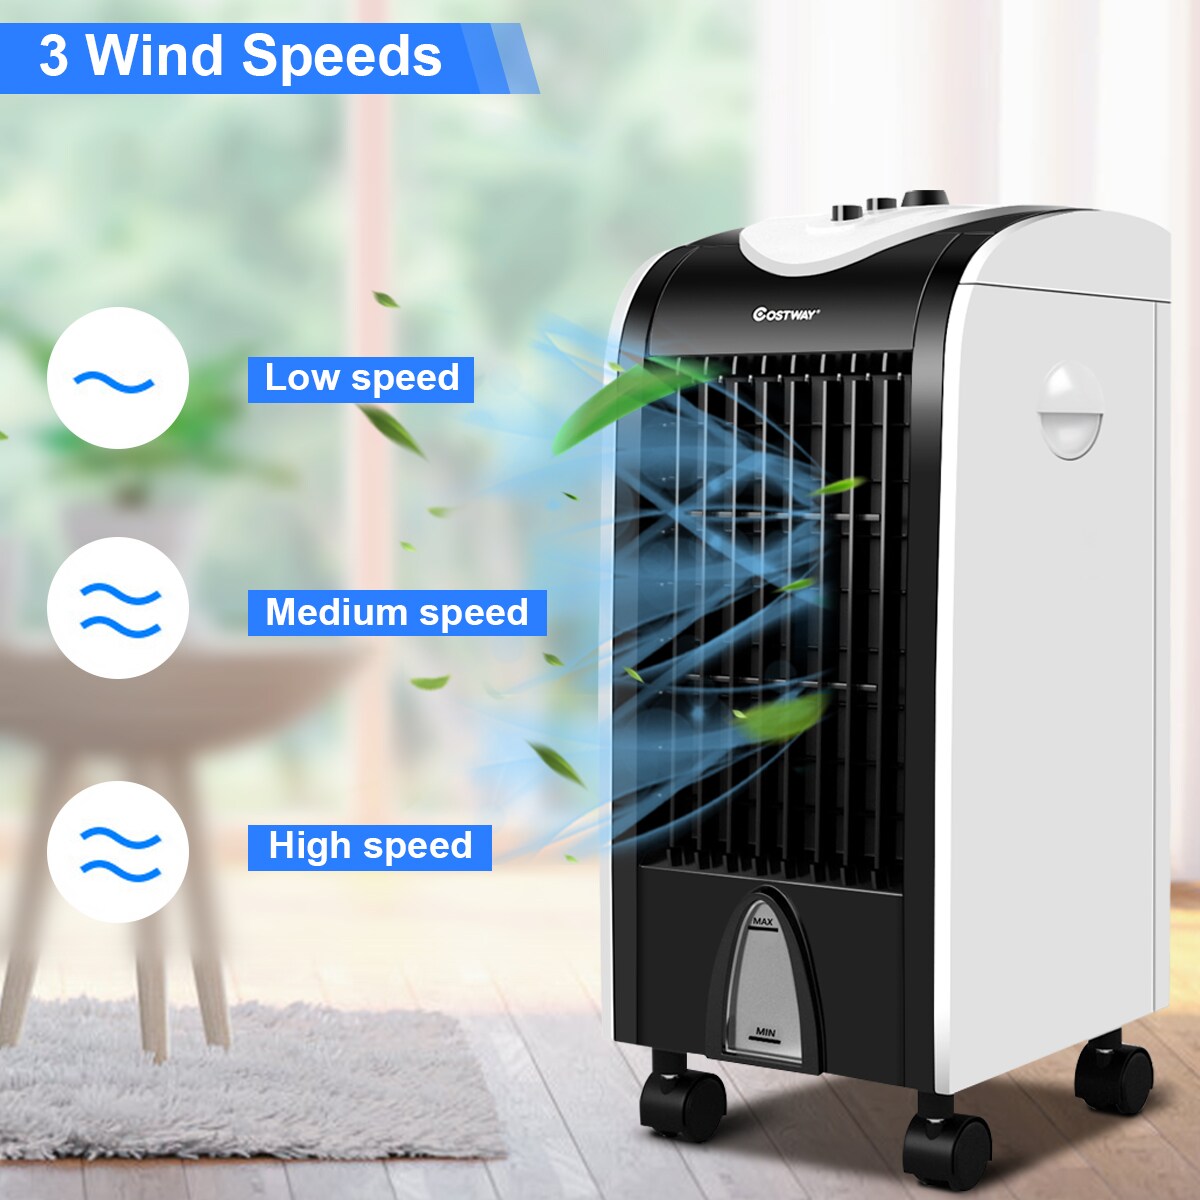 Automatic Oscillation-65W FAN MAZHONG Portable Air Cooler with 3 Operating Modes 3 Speeds